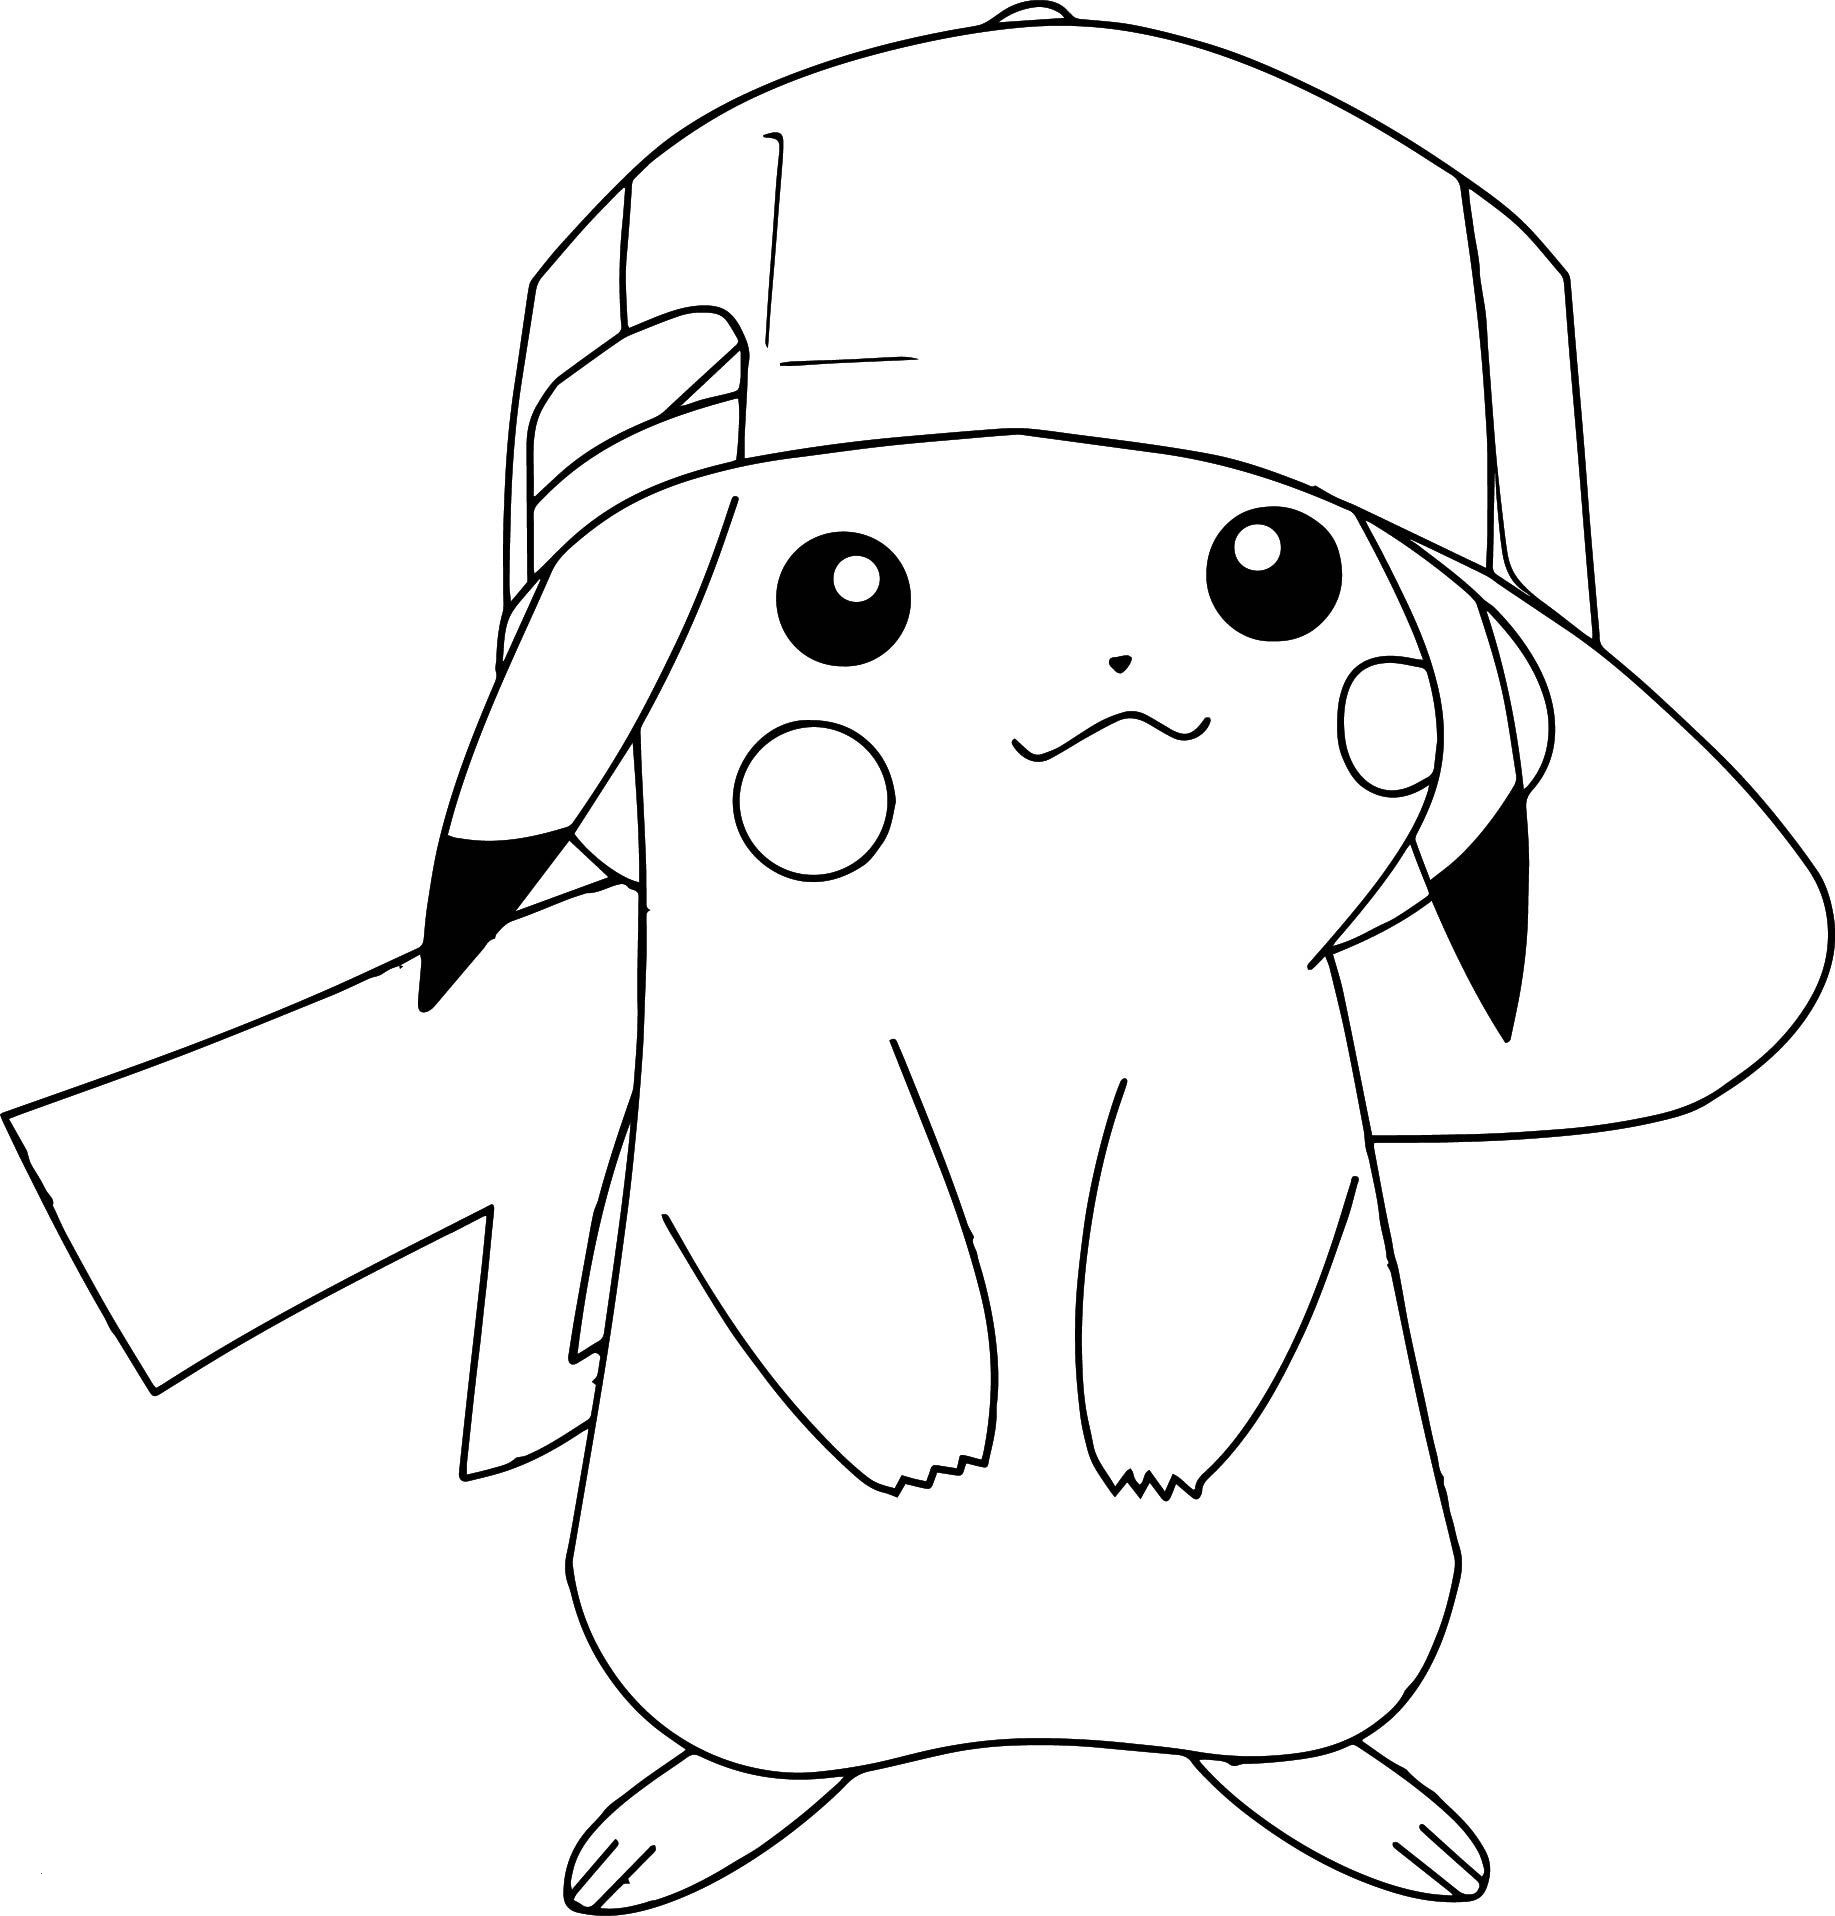 Pikachu Coloring Pages Inspirational Perfect Pokemon Coloring Pages Lol Pinterest